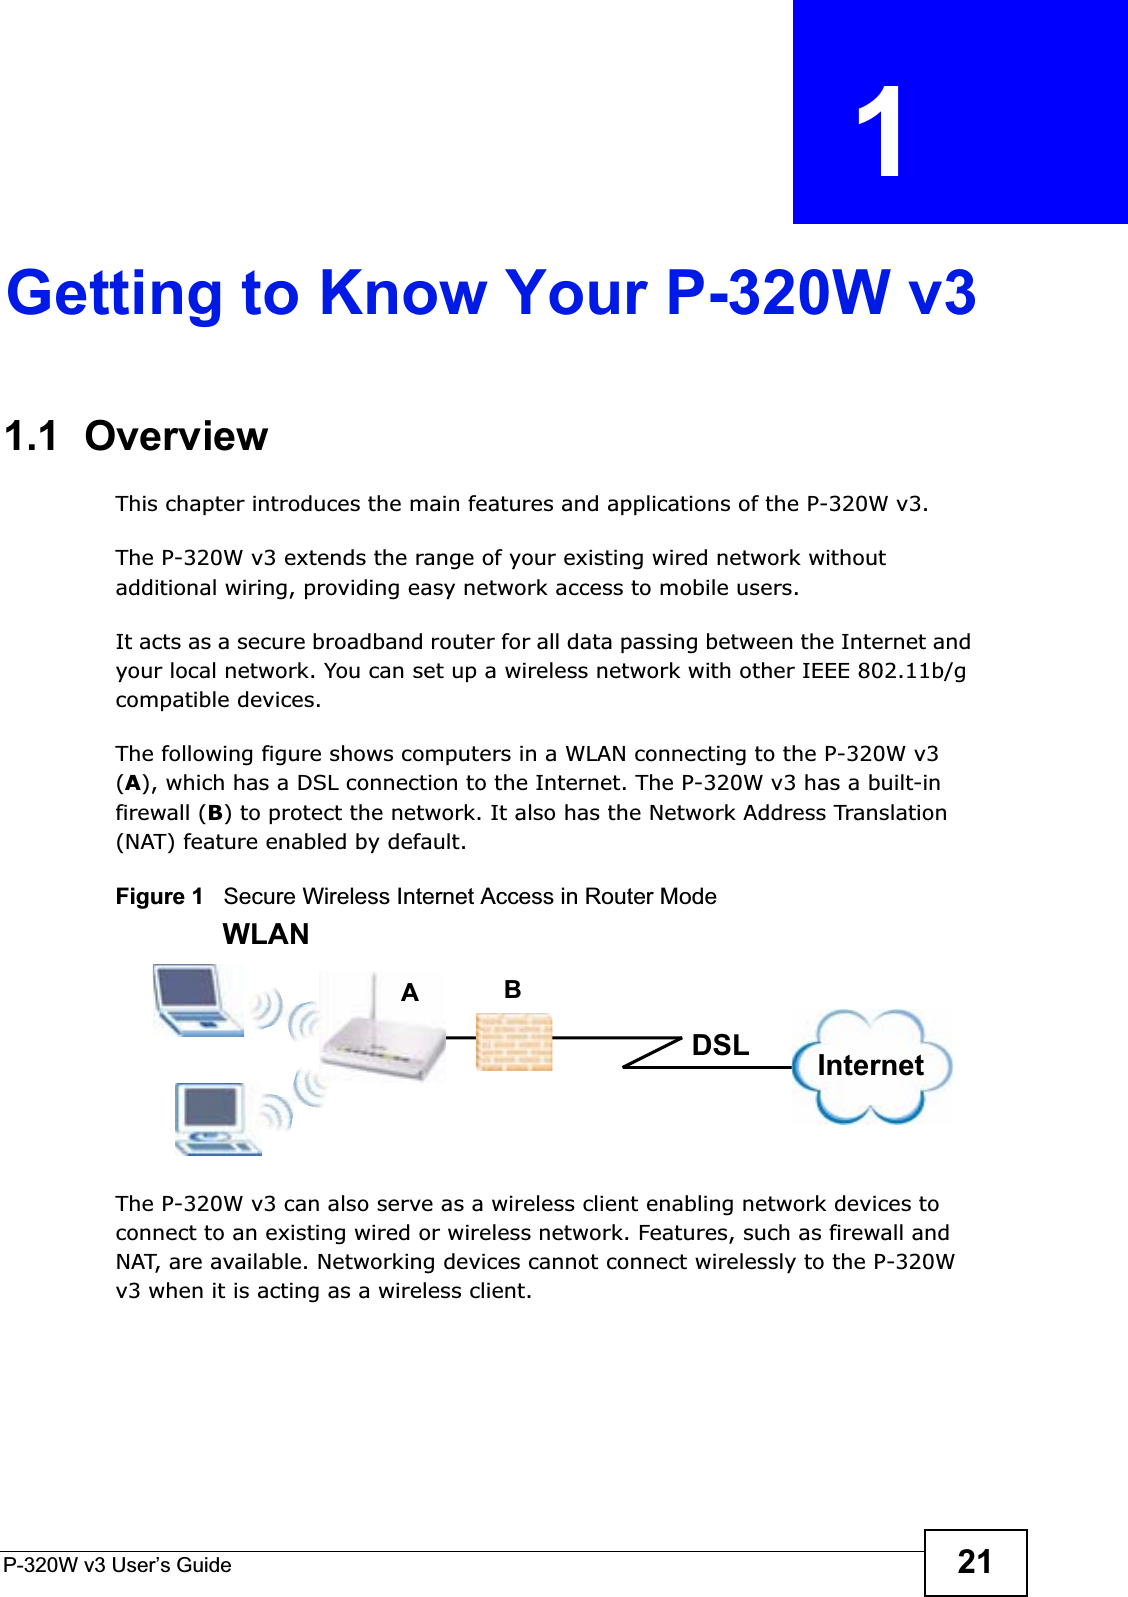 P-320W v3 User’s Guide 21CHAPTER  1 Getting to Know Your P-320W v31.1  OverviewThis chapter introduces the main features and applications of the P-320W v3.The P-320W v3 extends the range of your existing wired network without additional wiring, providing easy network access to mobile users. It acts as a secure broadband router for all data passing between the Internet and your local network. You can set up a wireless network with other IEEE 802.11b/g compatible devices. The following figure shows computers in a WLAN connecting to the P-320W v3 (A), which has a DSL connection to the Internet. The P-320W v3 has a built-in firewall (B) to protect the network. It also has the Network Address Translation (NAT) feature enabled by default.Figure 1   Secure Wireless Internet Access in Router Mode The P-320W v3 can also serve as a wireless client enabling network devices to connect to an existing wired or wireless network. Features, such as firewall and NAT, are available. Networking devices cannot connect wirelessly to the P-320W v3 when it is acting as a wireless client.ABWLANInternetDSL